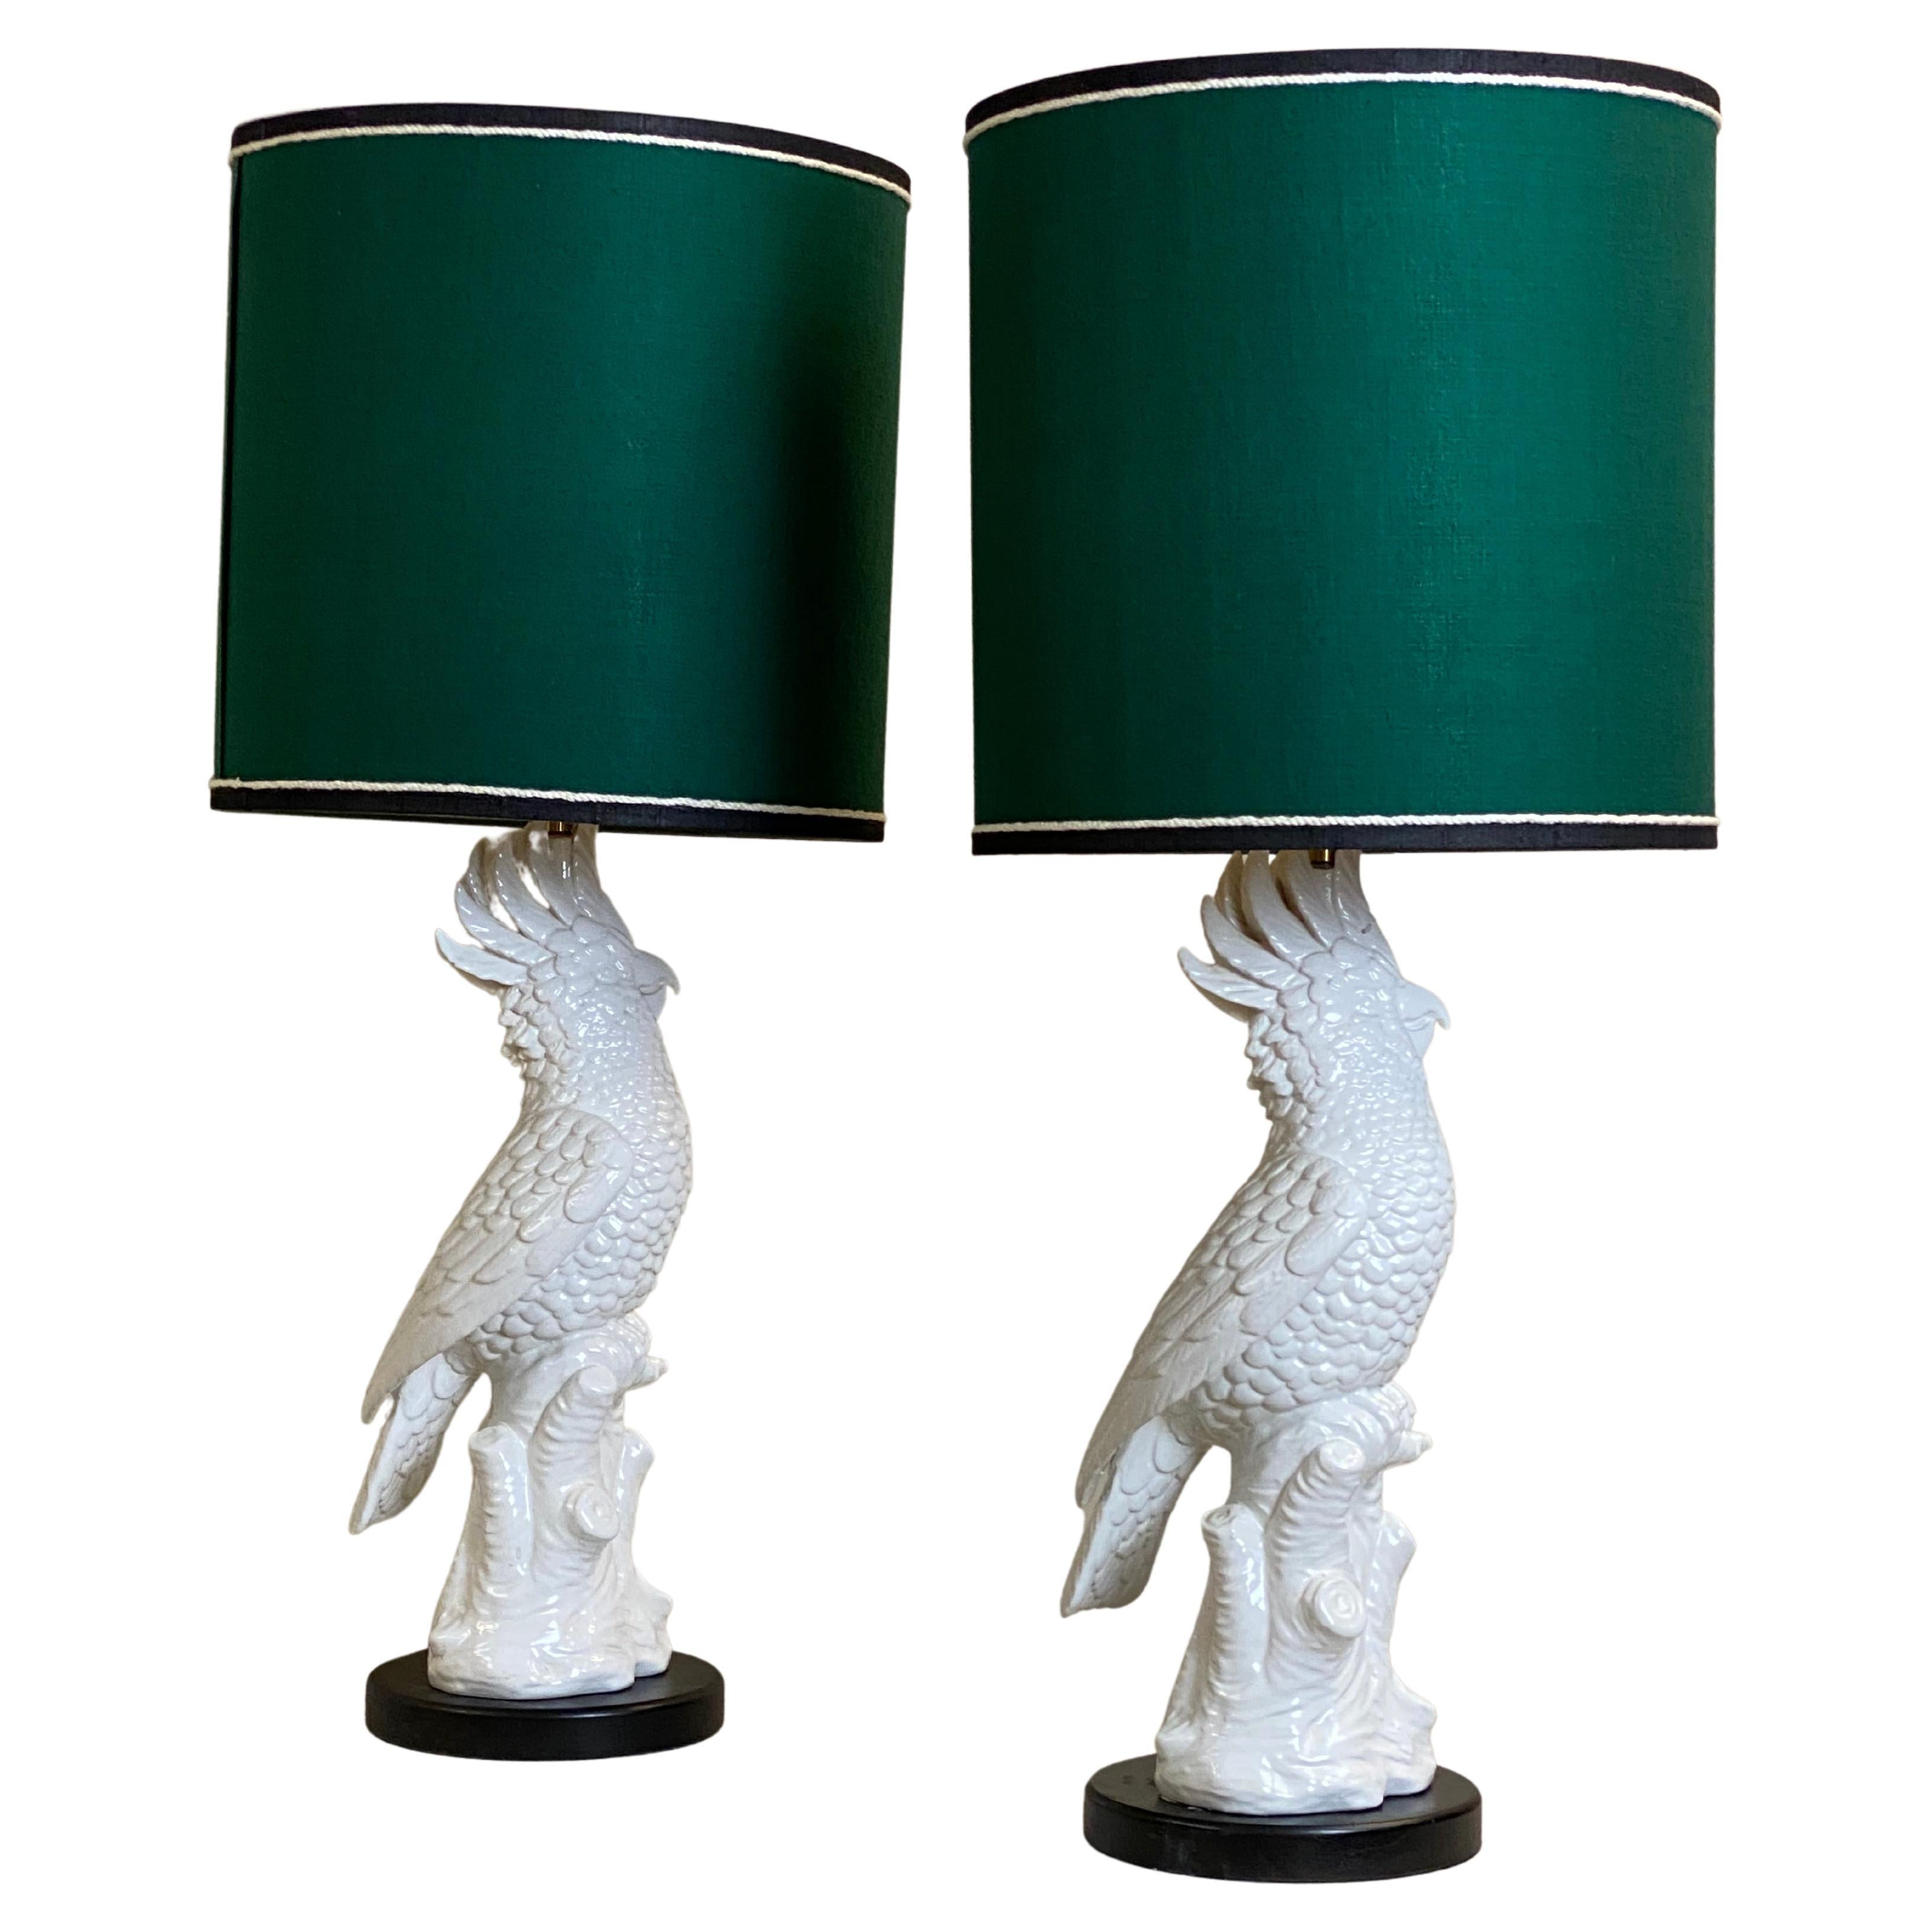  Mid Century Modern, Parrot Table Lamps in White Porcelain, Italy, 1970s.